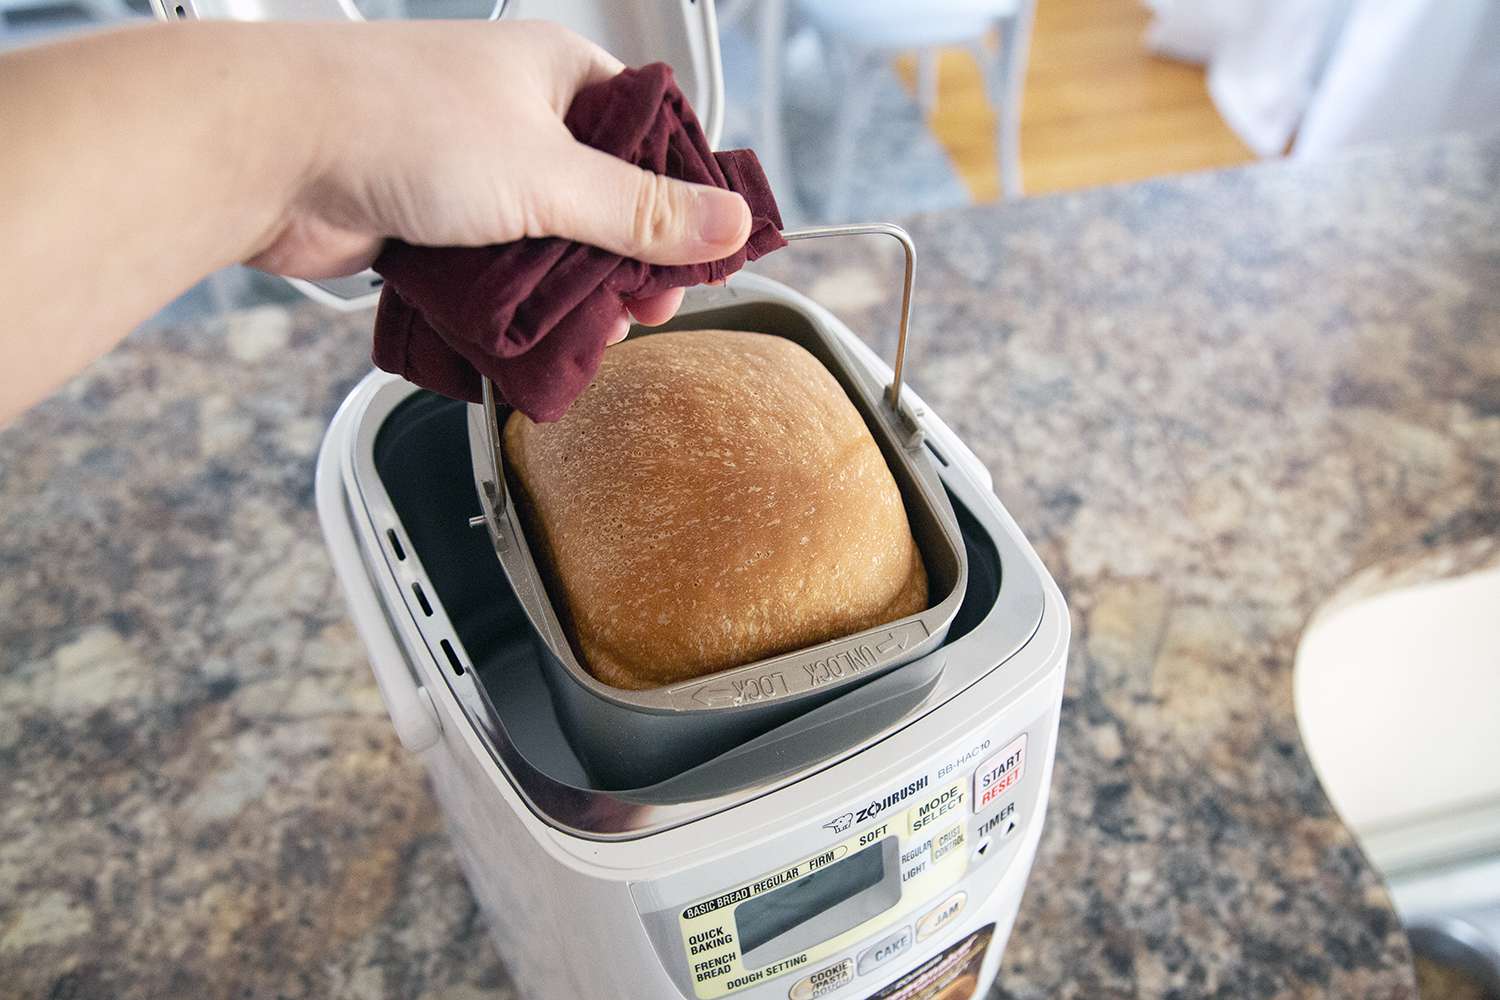 Briskind 19-in-1 Compact Bread Maker Machine, 1.5 lb / 1 lb Loaf Small  Breadmaker with Carrying Handle, Including Gluten Free, Dough, Jam, Yogurt